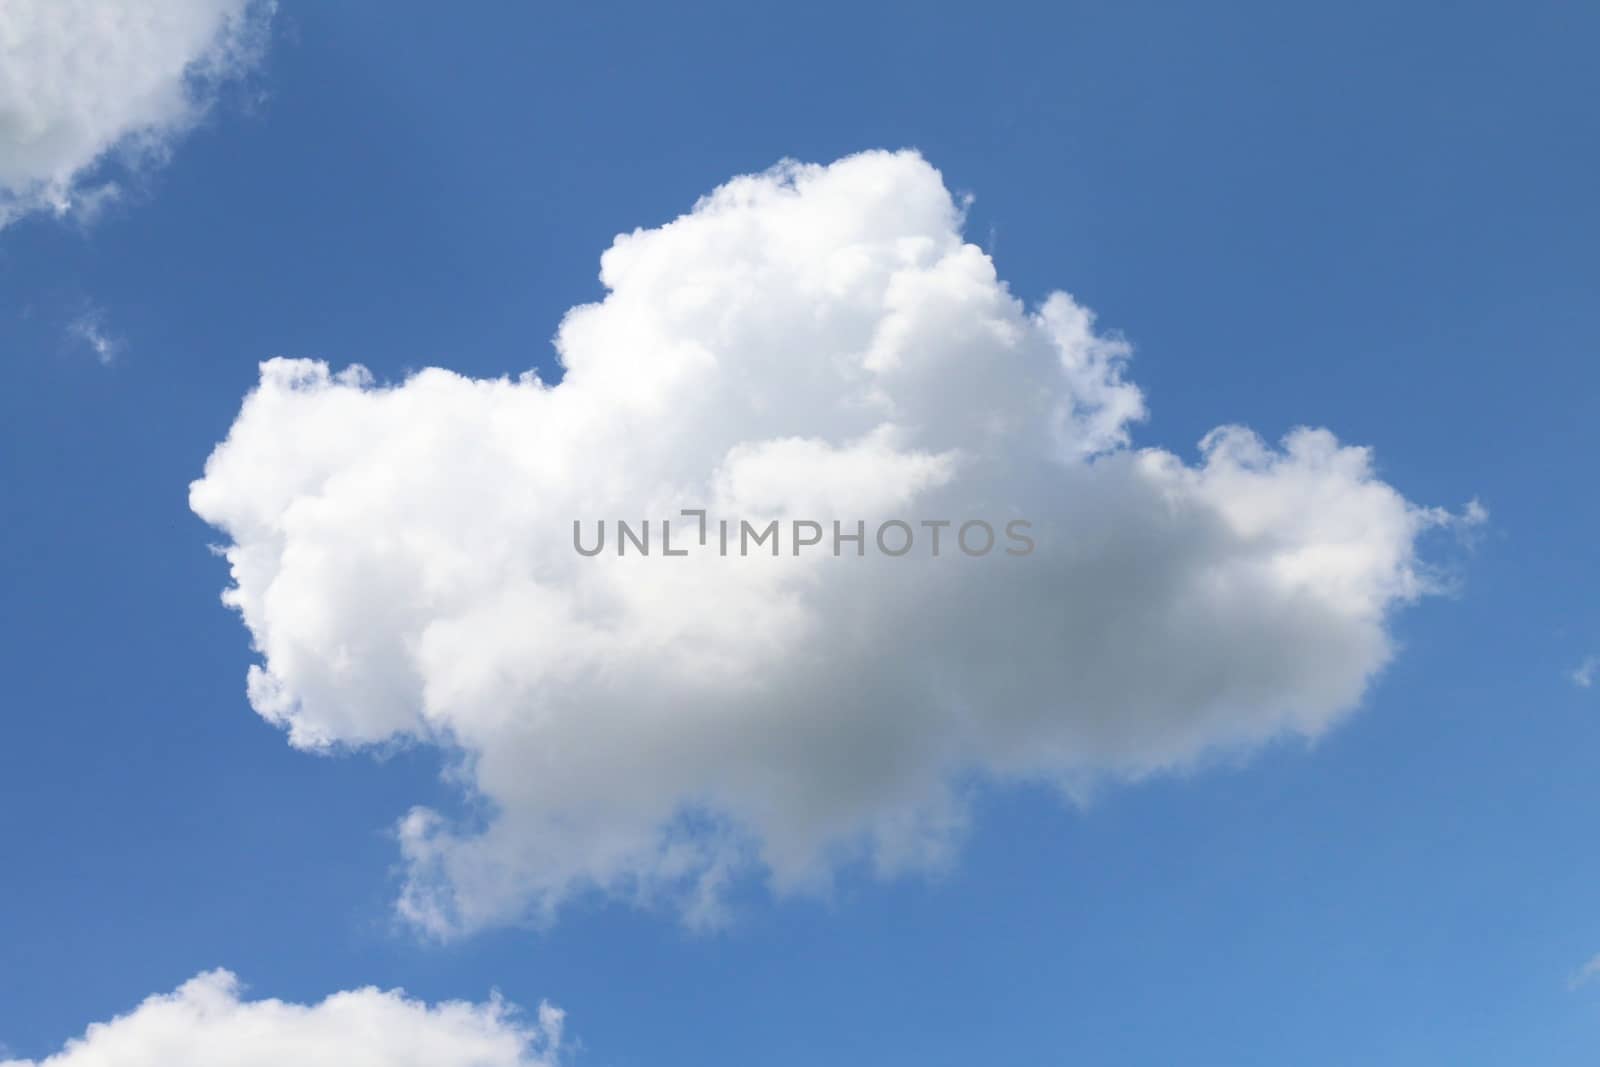 big cloud on sky clear, isolated of one cloud beautiful on sky background by cgdeaw